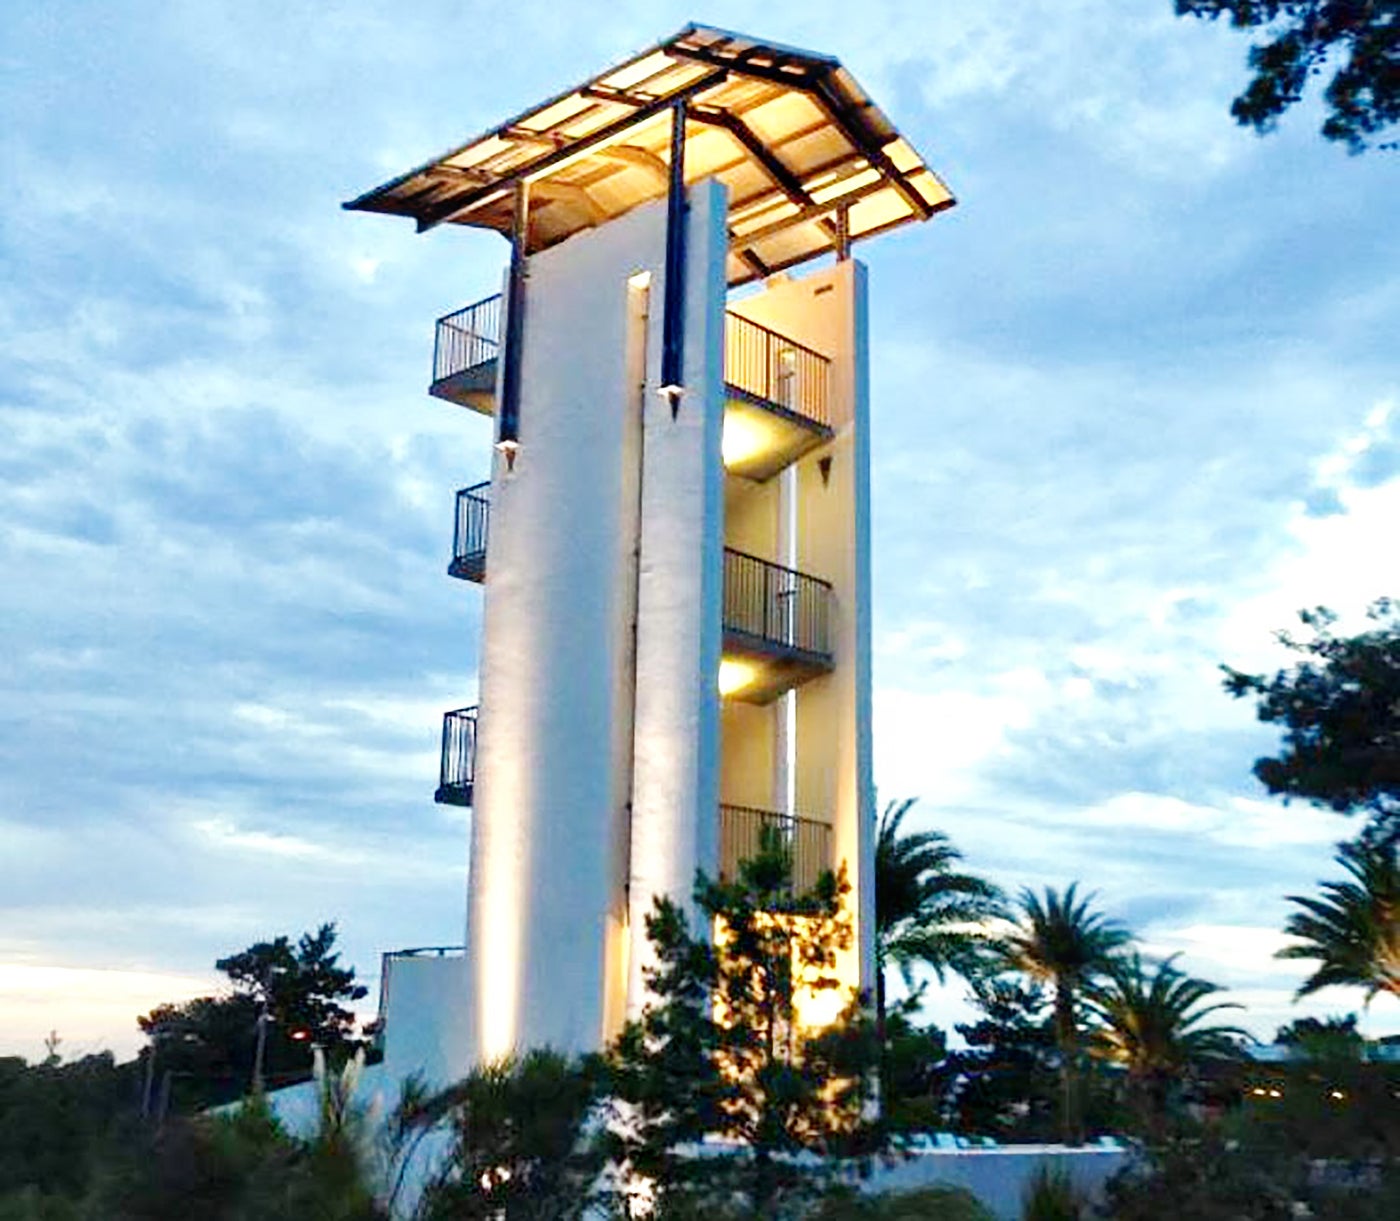 Observation Tower by the pool